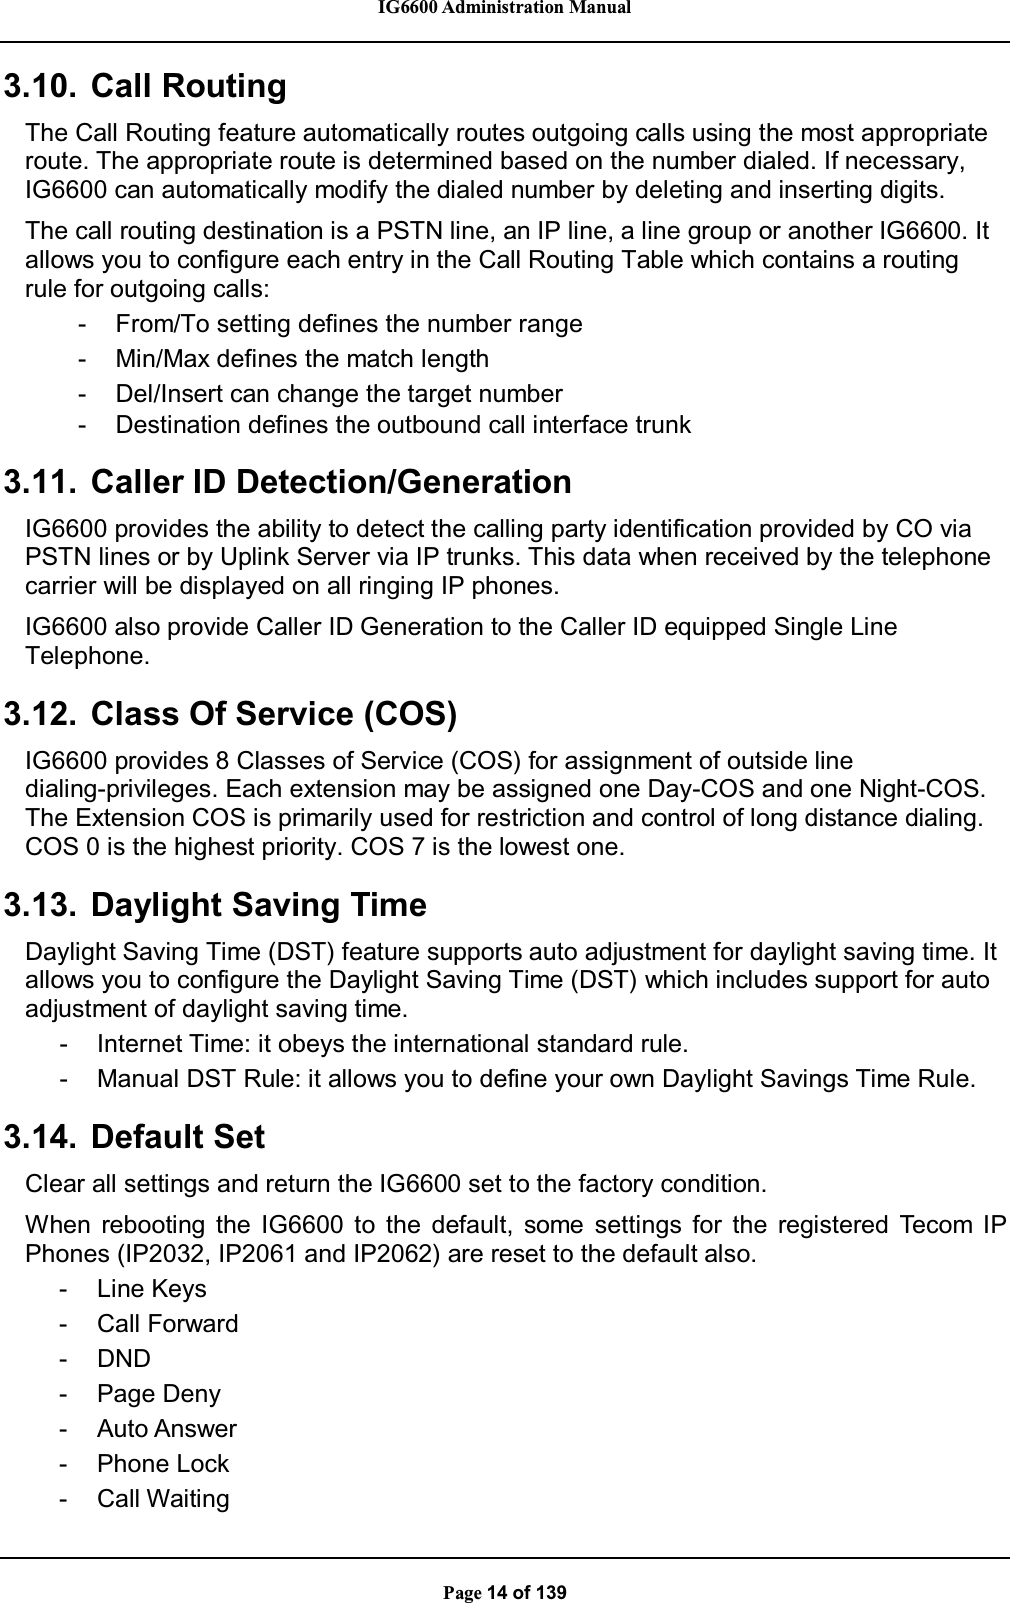 IG6600 Administration ManualPage 14 of 1393.10. Call RoutingThe Call Routing feature automatically routes outgoing calls using the most appropriateroute. The appropriate route is determined based on the number dialed. If necessary,IG6600 can automatically modify the dialed number by deleting and inserting digits.The call routing destination is a PSTN line, an IP line, a line group or another IG6600. It allows you to configure each entry in the Call Routing Table which contains a routingrule for outgoing calls:- From/To setting defines the number range- Min/Max defines the match length- Del/Insert can change the target number- Destination defines the outbound call interface trunk3.11. Caller ID Detection/GenerationIG6600 provides the ability to detect the calling party identification provided by CO viaPSTN lines or by Uplink Server via IP trunks. This data when received by the telephonecarrier will be displayed on all ringing IP phones.IG6600 also provide Caller ID Generation to the Caller ID equipped Single LineTelephone.3.12. Class Of Service (COS)IG6600 provides 8 Classes of Service (COS) for assignment of outside linedialing-privileges. Each extension may be assigned one Day-COS and one Night-COS.The Extension COS is primarily used for restriction and control of long distance dialing.COS 0 is the highest priority. COS 7 is the lowest one.3.13. Daylight Saving TimeDaylight Saving Time (DST) feature supports auto adjustment for daylight saving time. It allows you to configure the Daylight Saving Time (DST) which includes support for autoadjustment of daylight saving time.- Internet Time: it obeys the international standard rule.- Manual DST Rule: it allows you to define your own Daylight Savings Time Rule.3.14. Default SetClear all settings and return the IG6600 set to the factory condition.When rebooting the IG6600 to the default, some settings for the registered Tecom IPPhones (IP2032, IP2061 and IP2062) are reset to the default also.-LineKeys- Call Forward- DND- Page Deny- Auto Answer- Phone Lock- Call Waiting